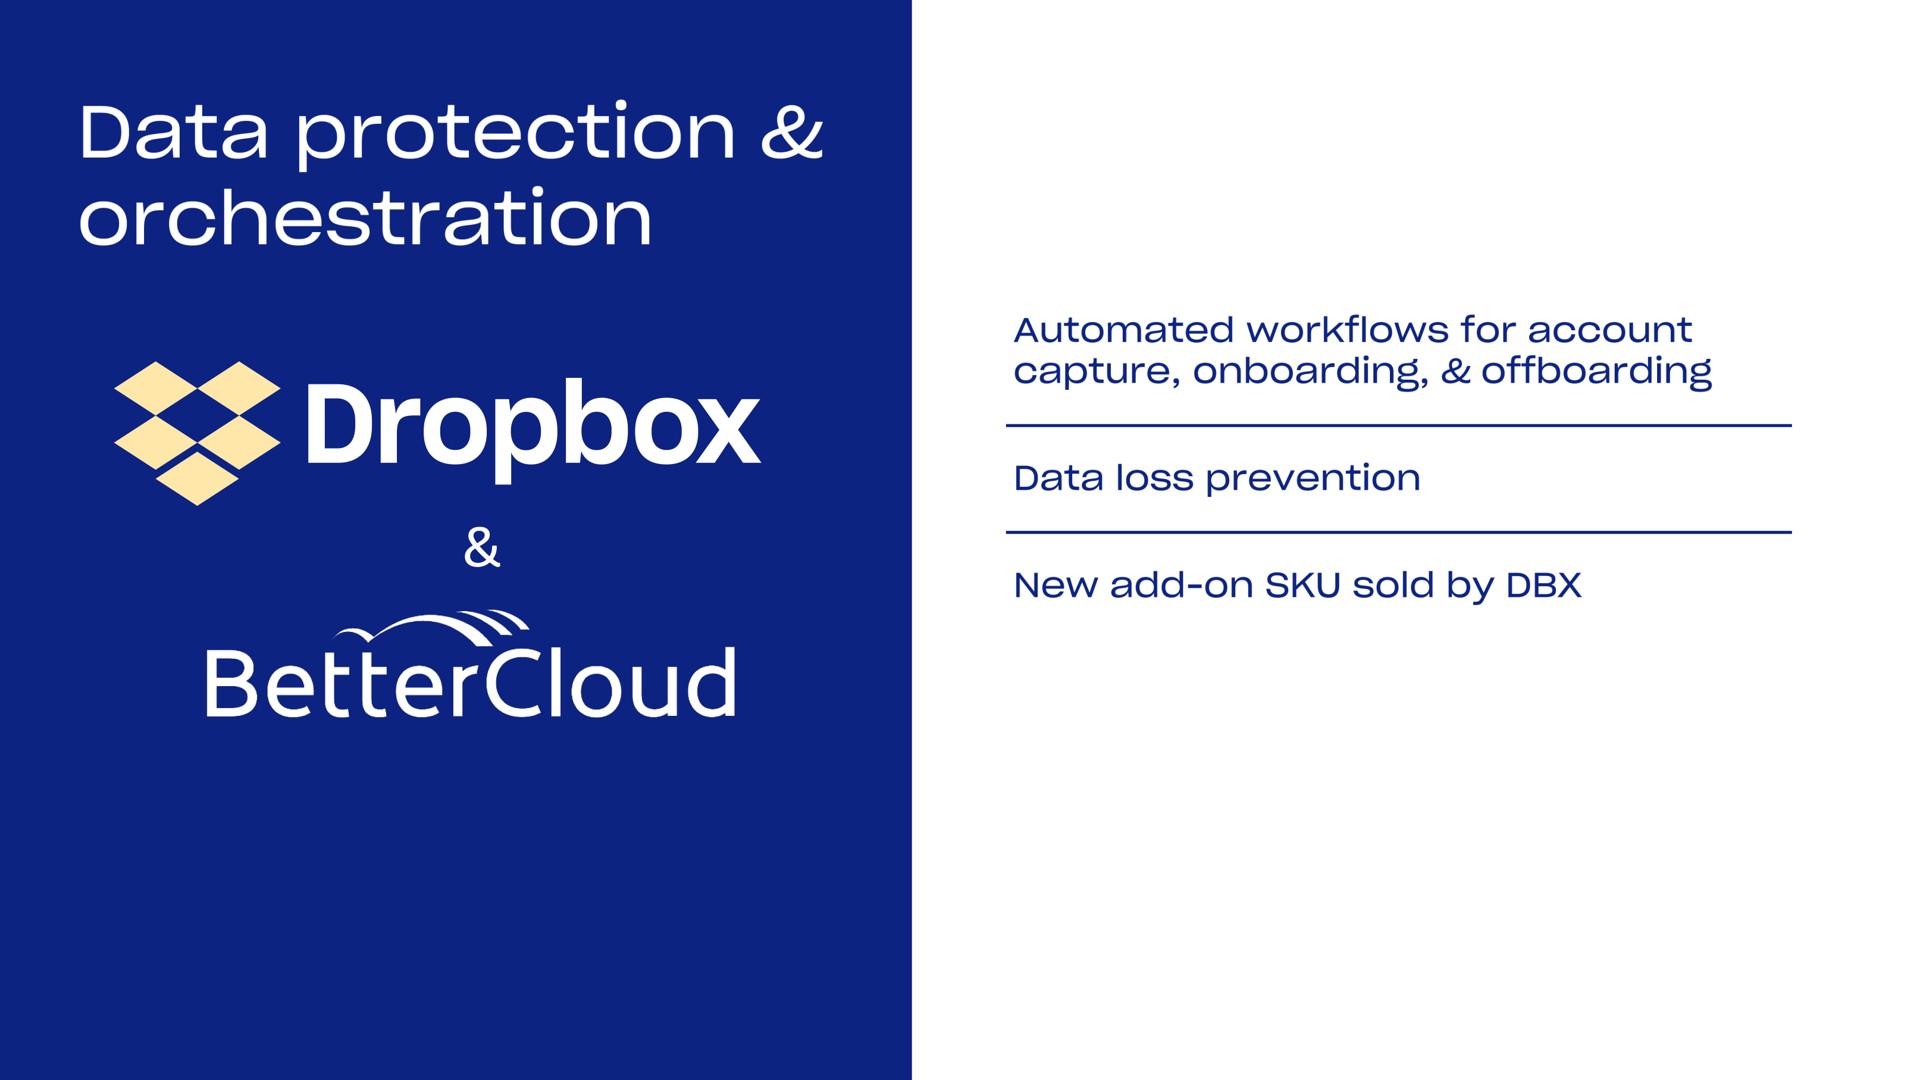 data protection orchestration | Dropbox